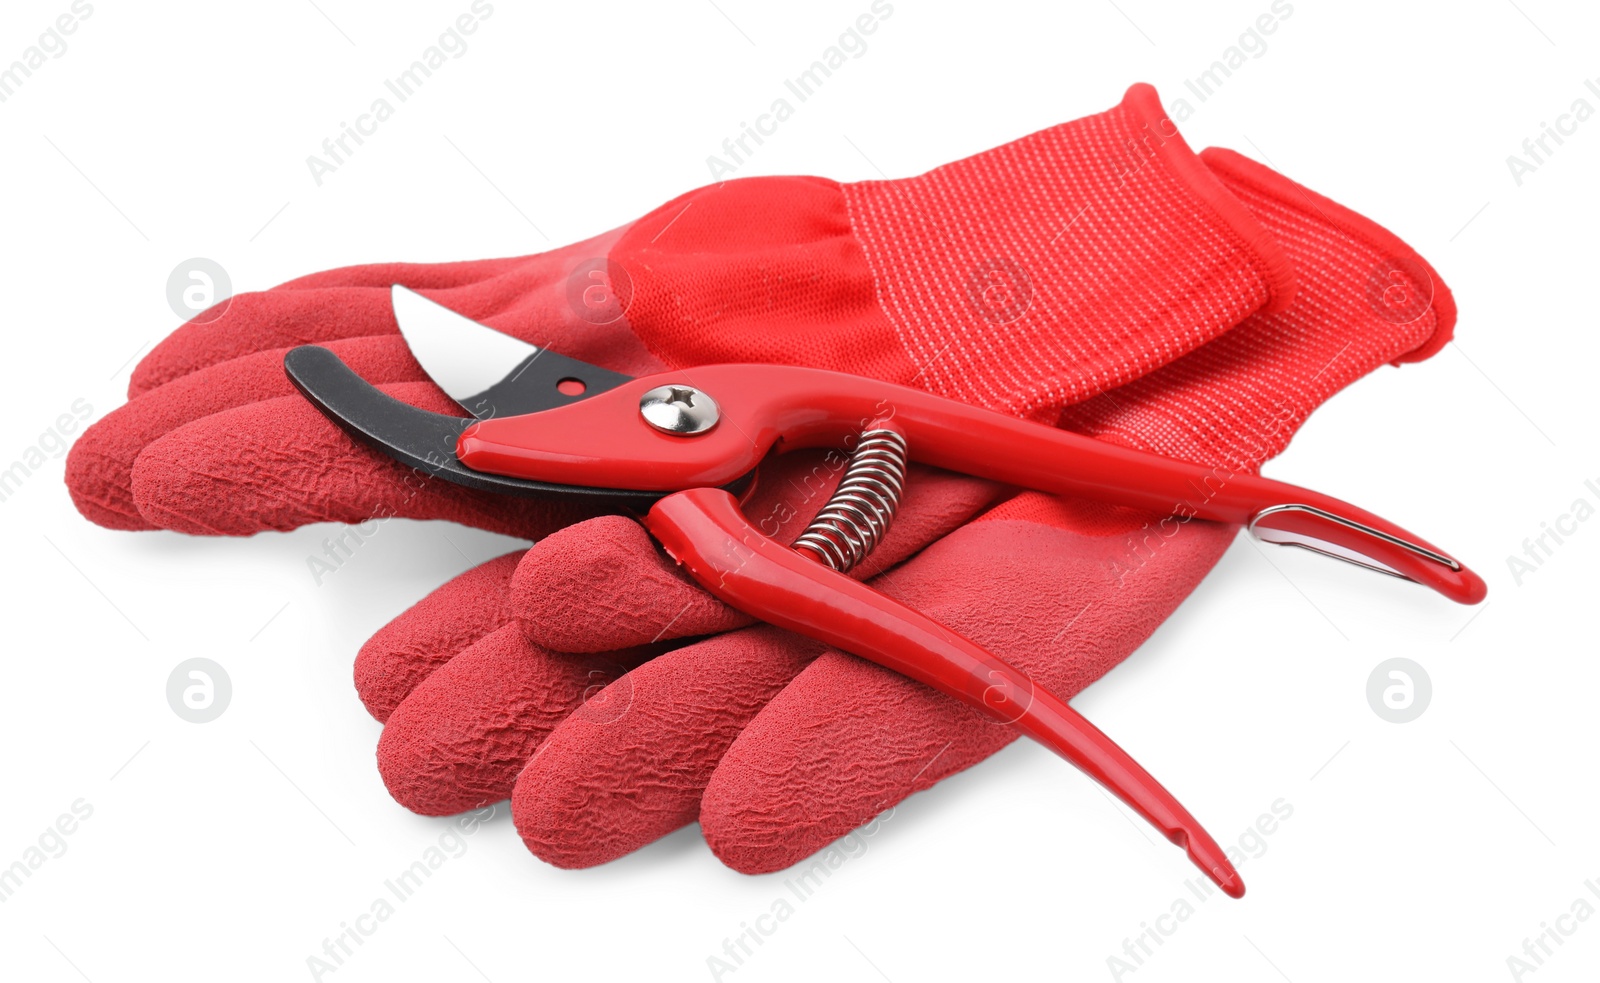 Photo of Pair of red gardening gloves and secateurs isolated on white